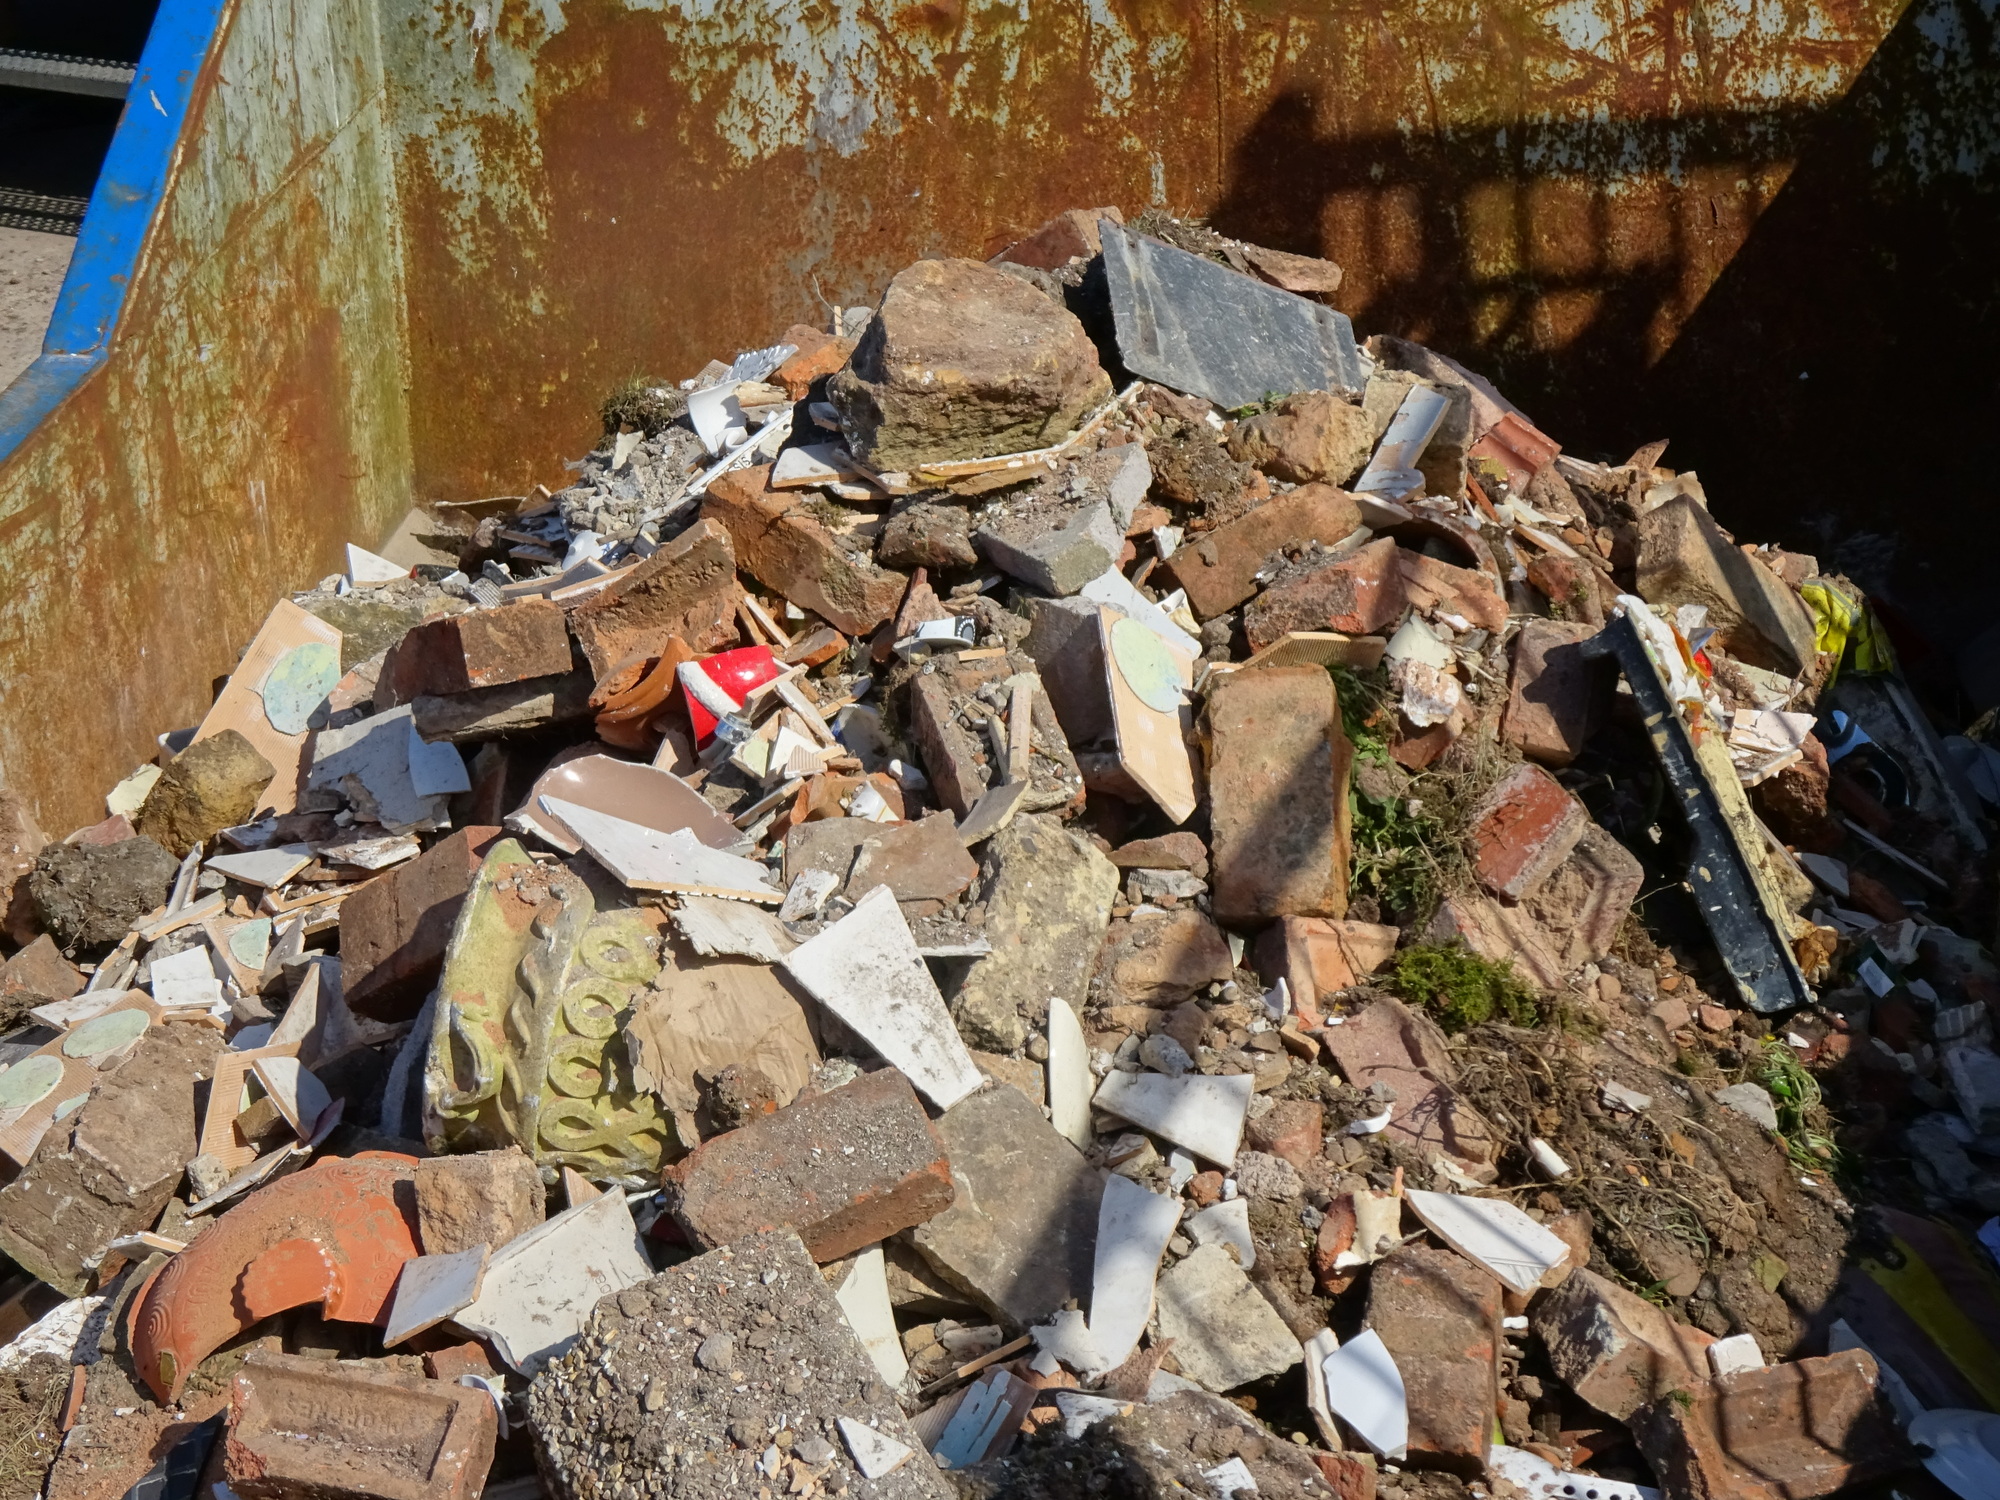 Bricks in a skip at the recycling site